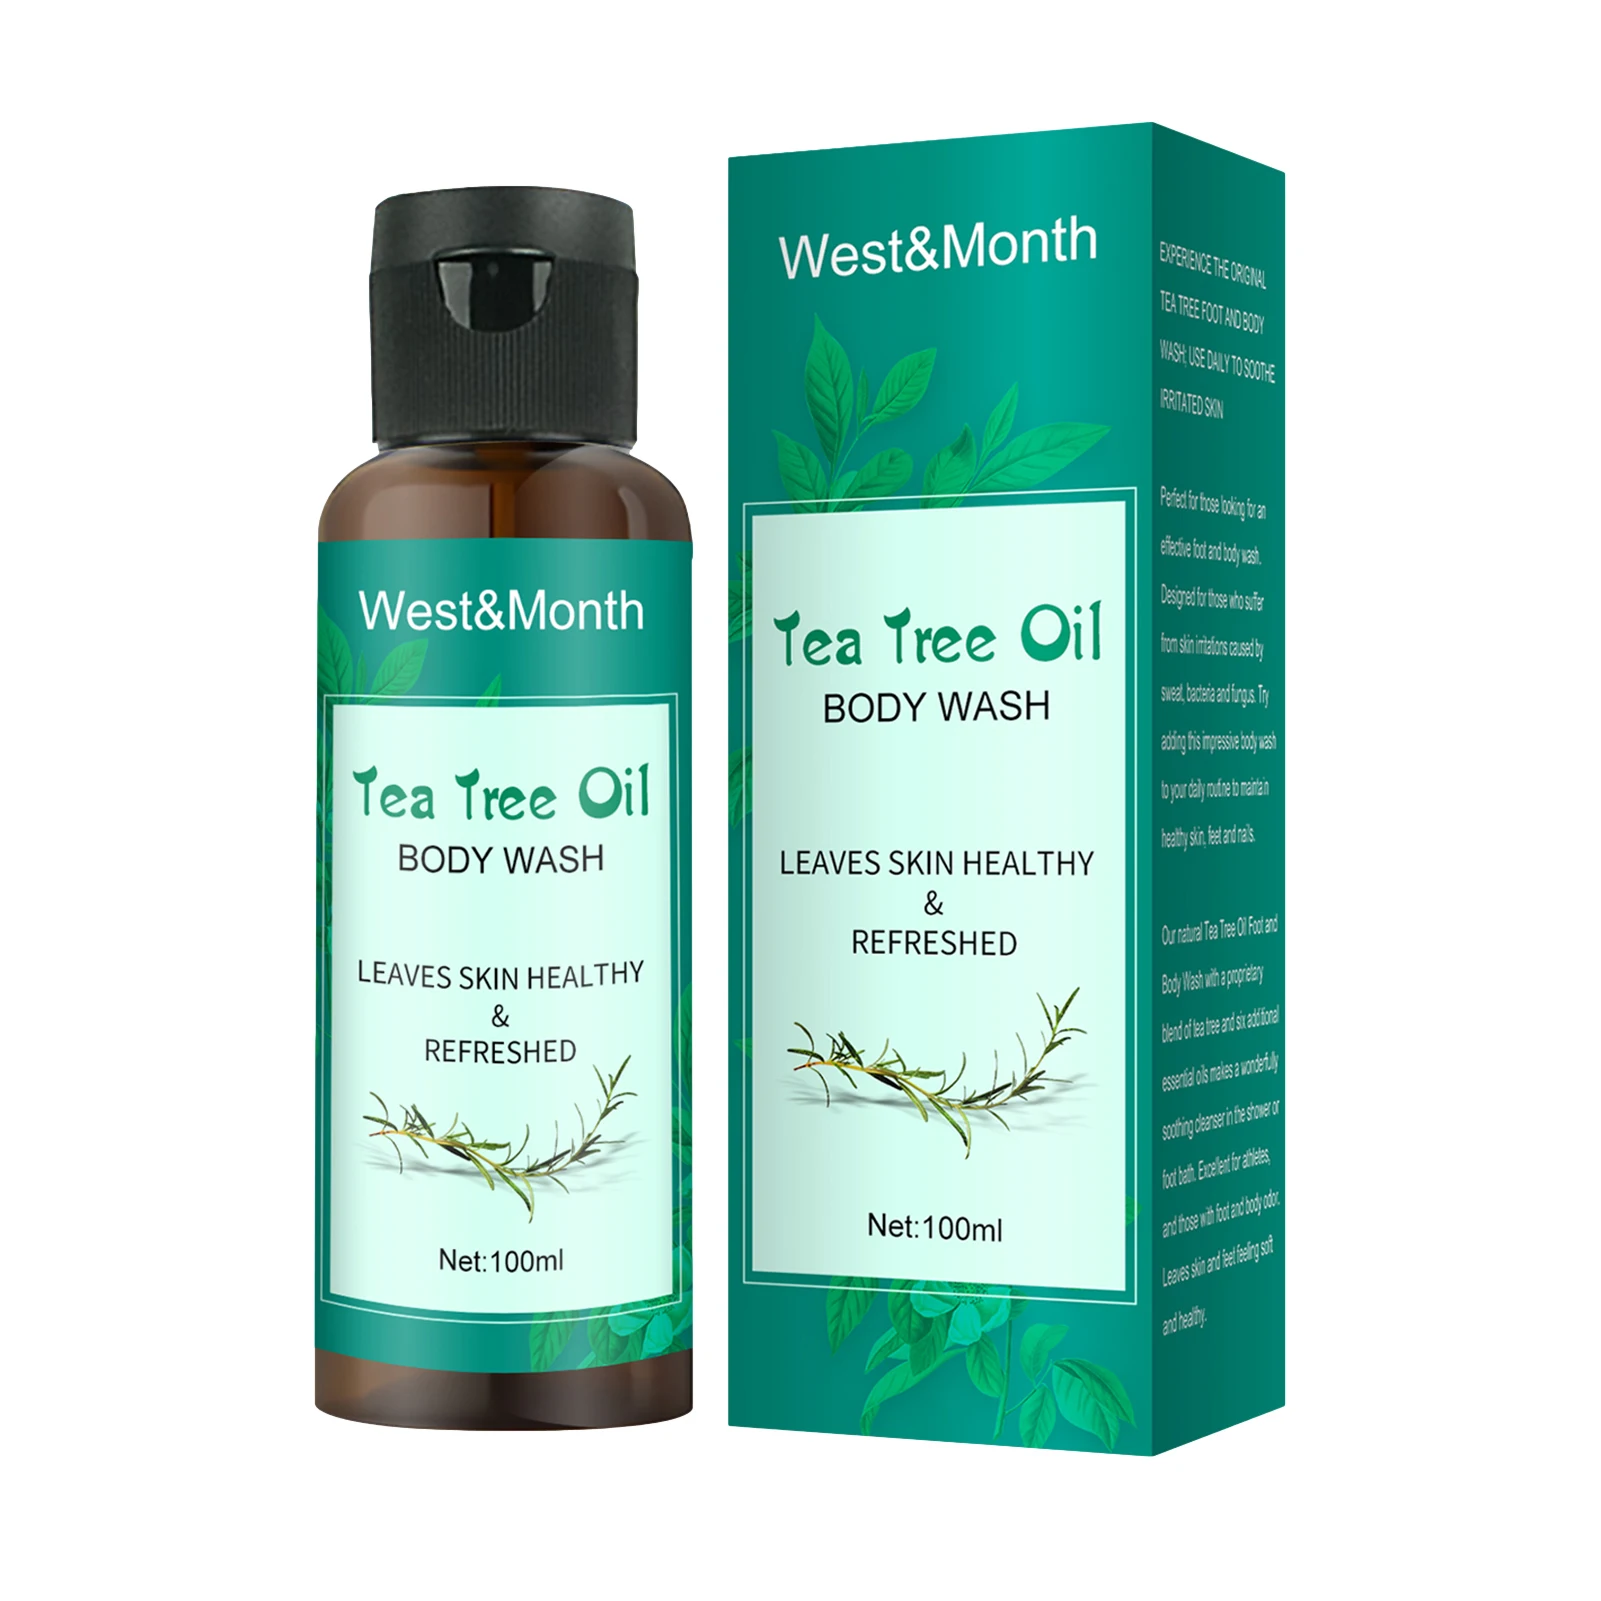 

Tea Tree Oil Body Wash 100ml Tea Tree Oil Body Wash With Aloe Extract For Women Men Soothes Itching And Promotes Healthy Skin